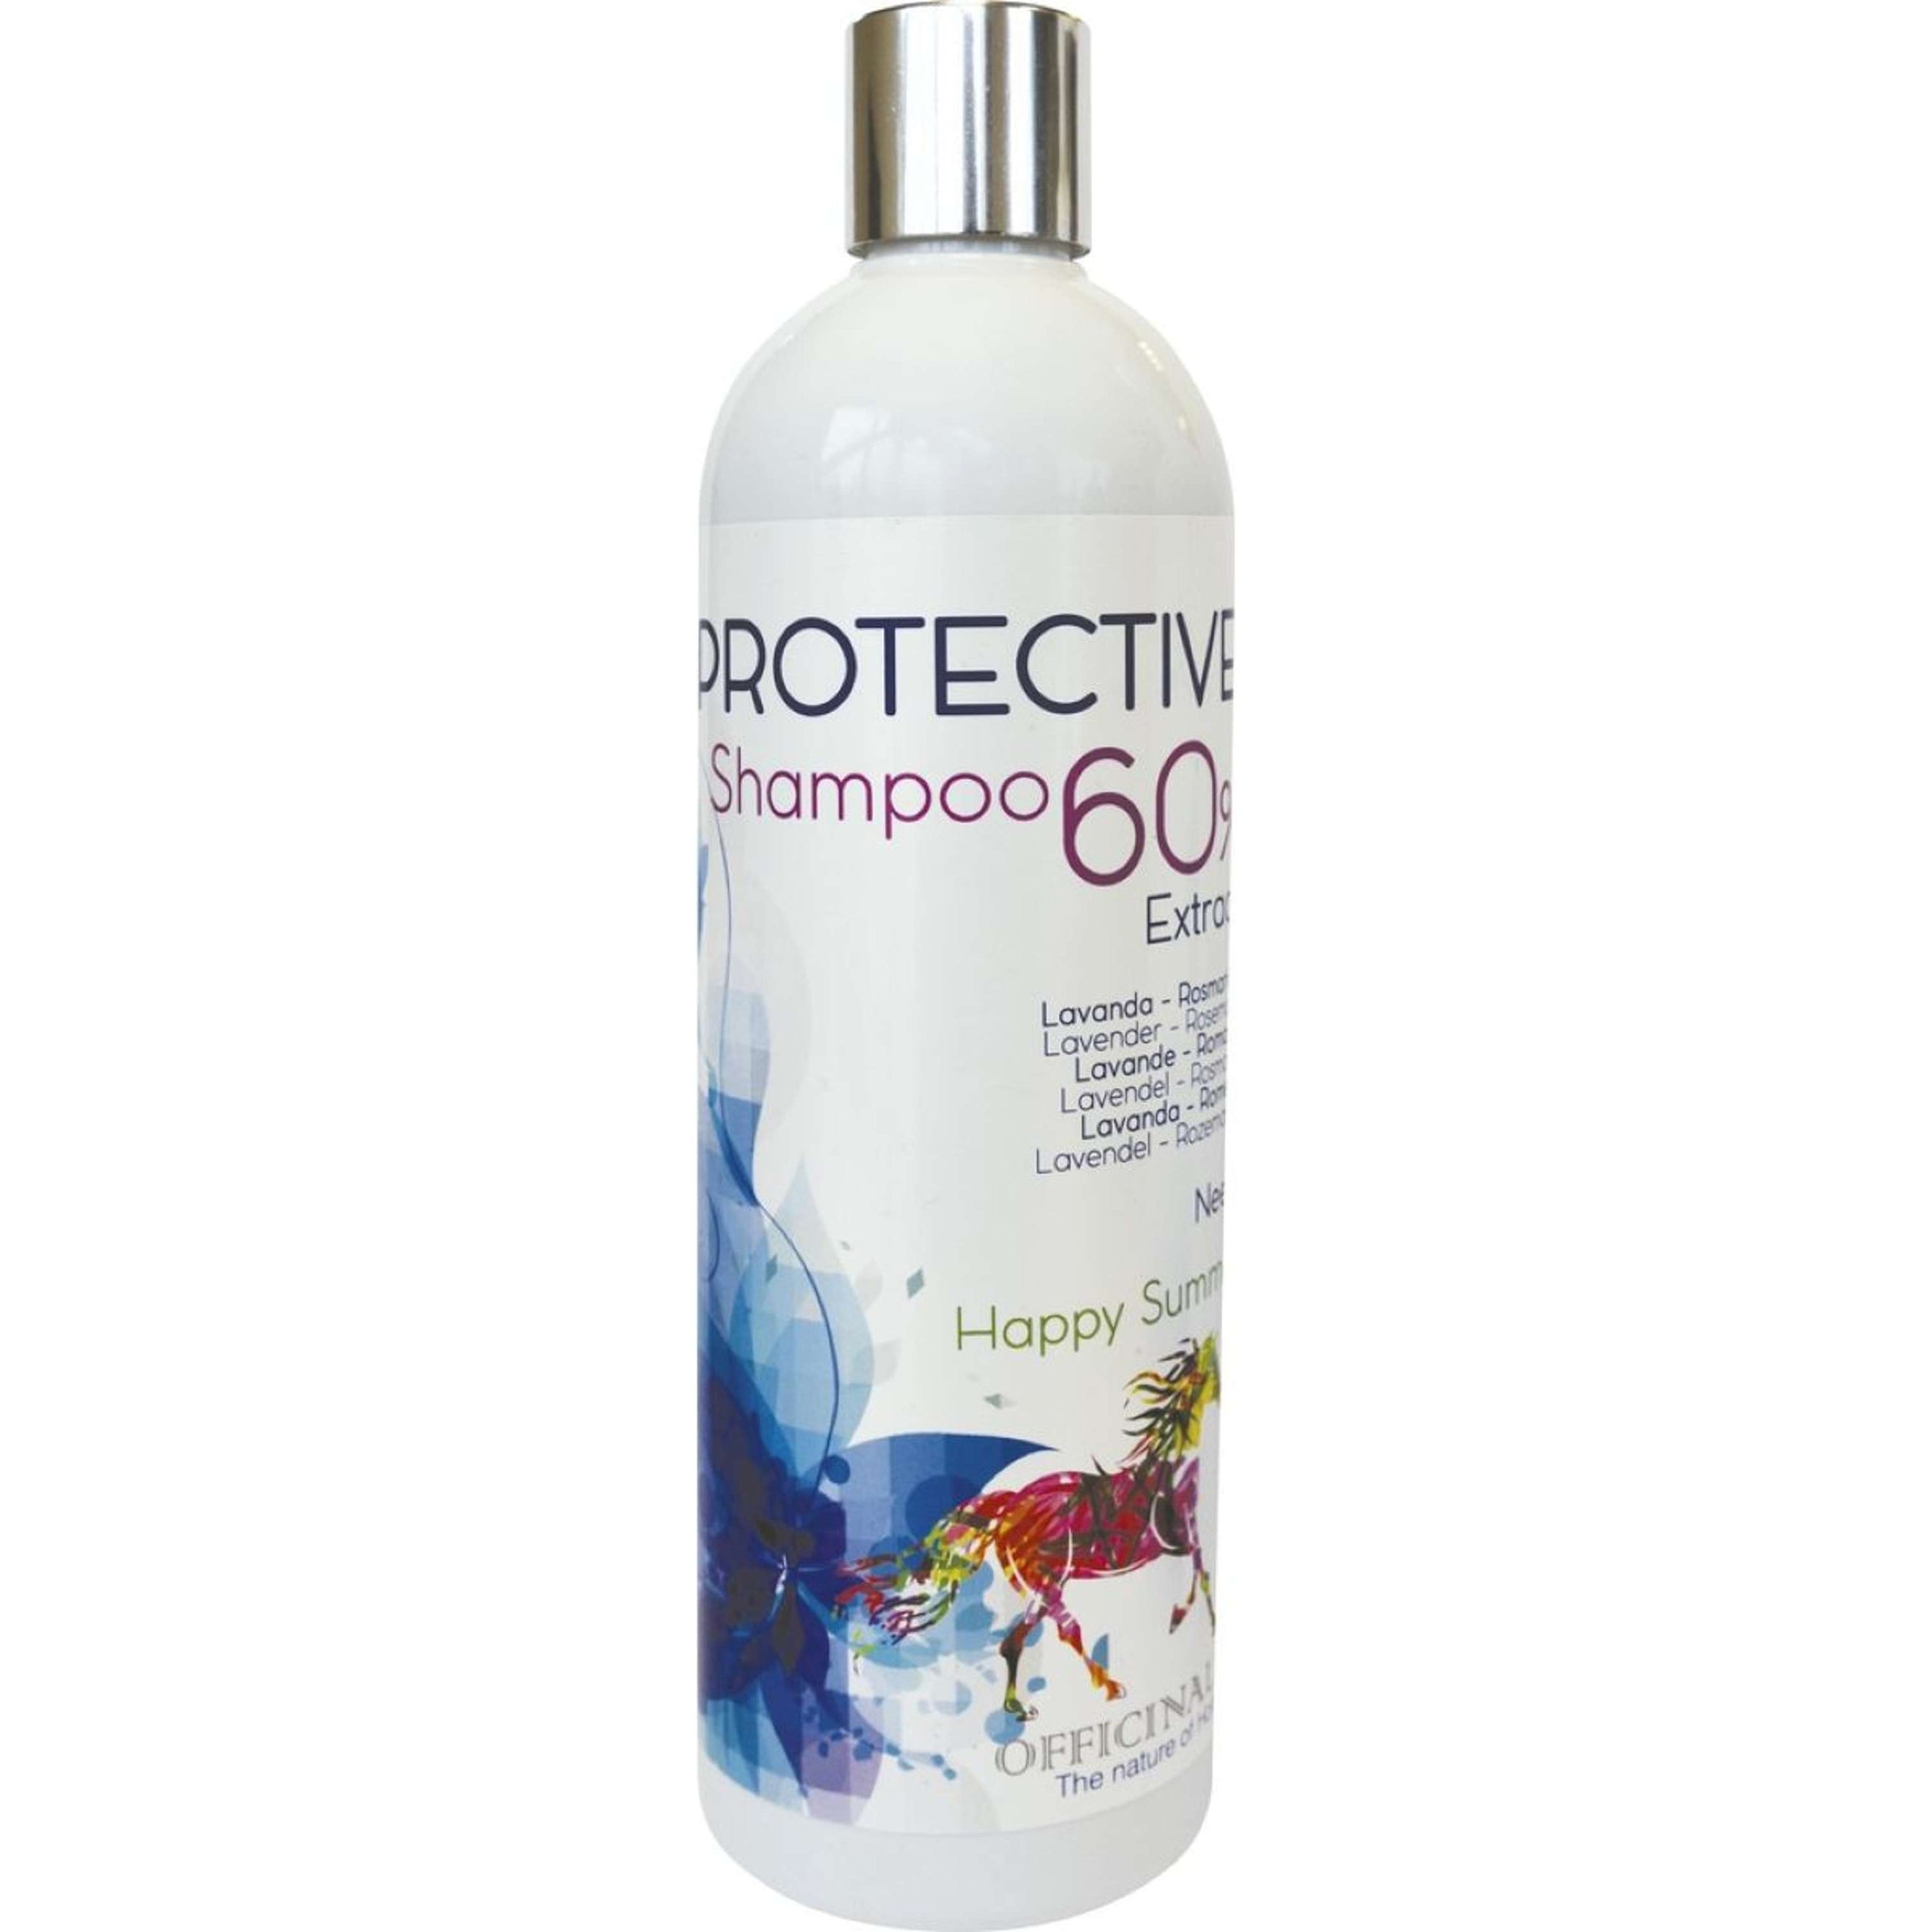 Officinalis Shampooing 60% Protective